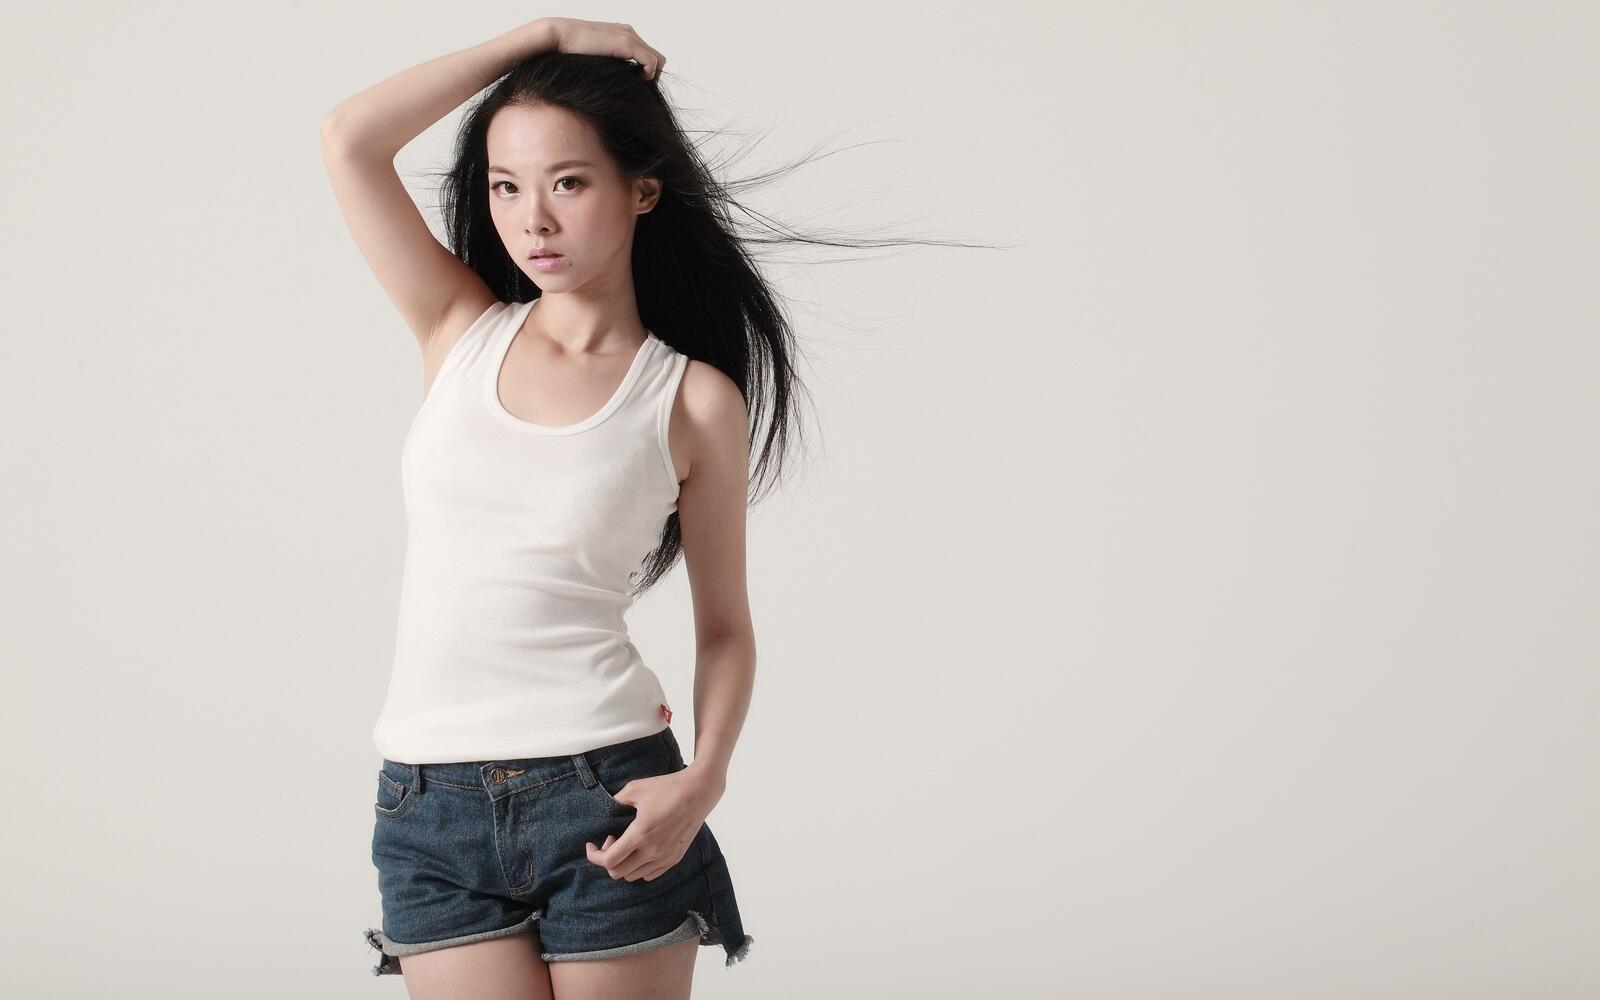 Free photo A girl in a white T-shirt and short shorts.